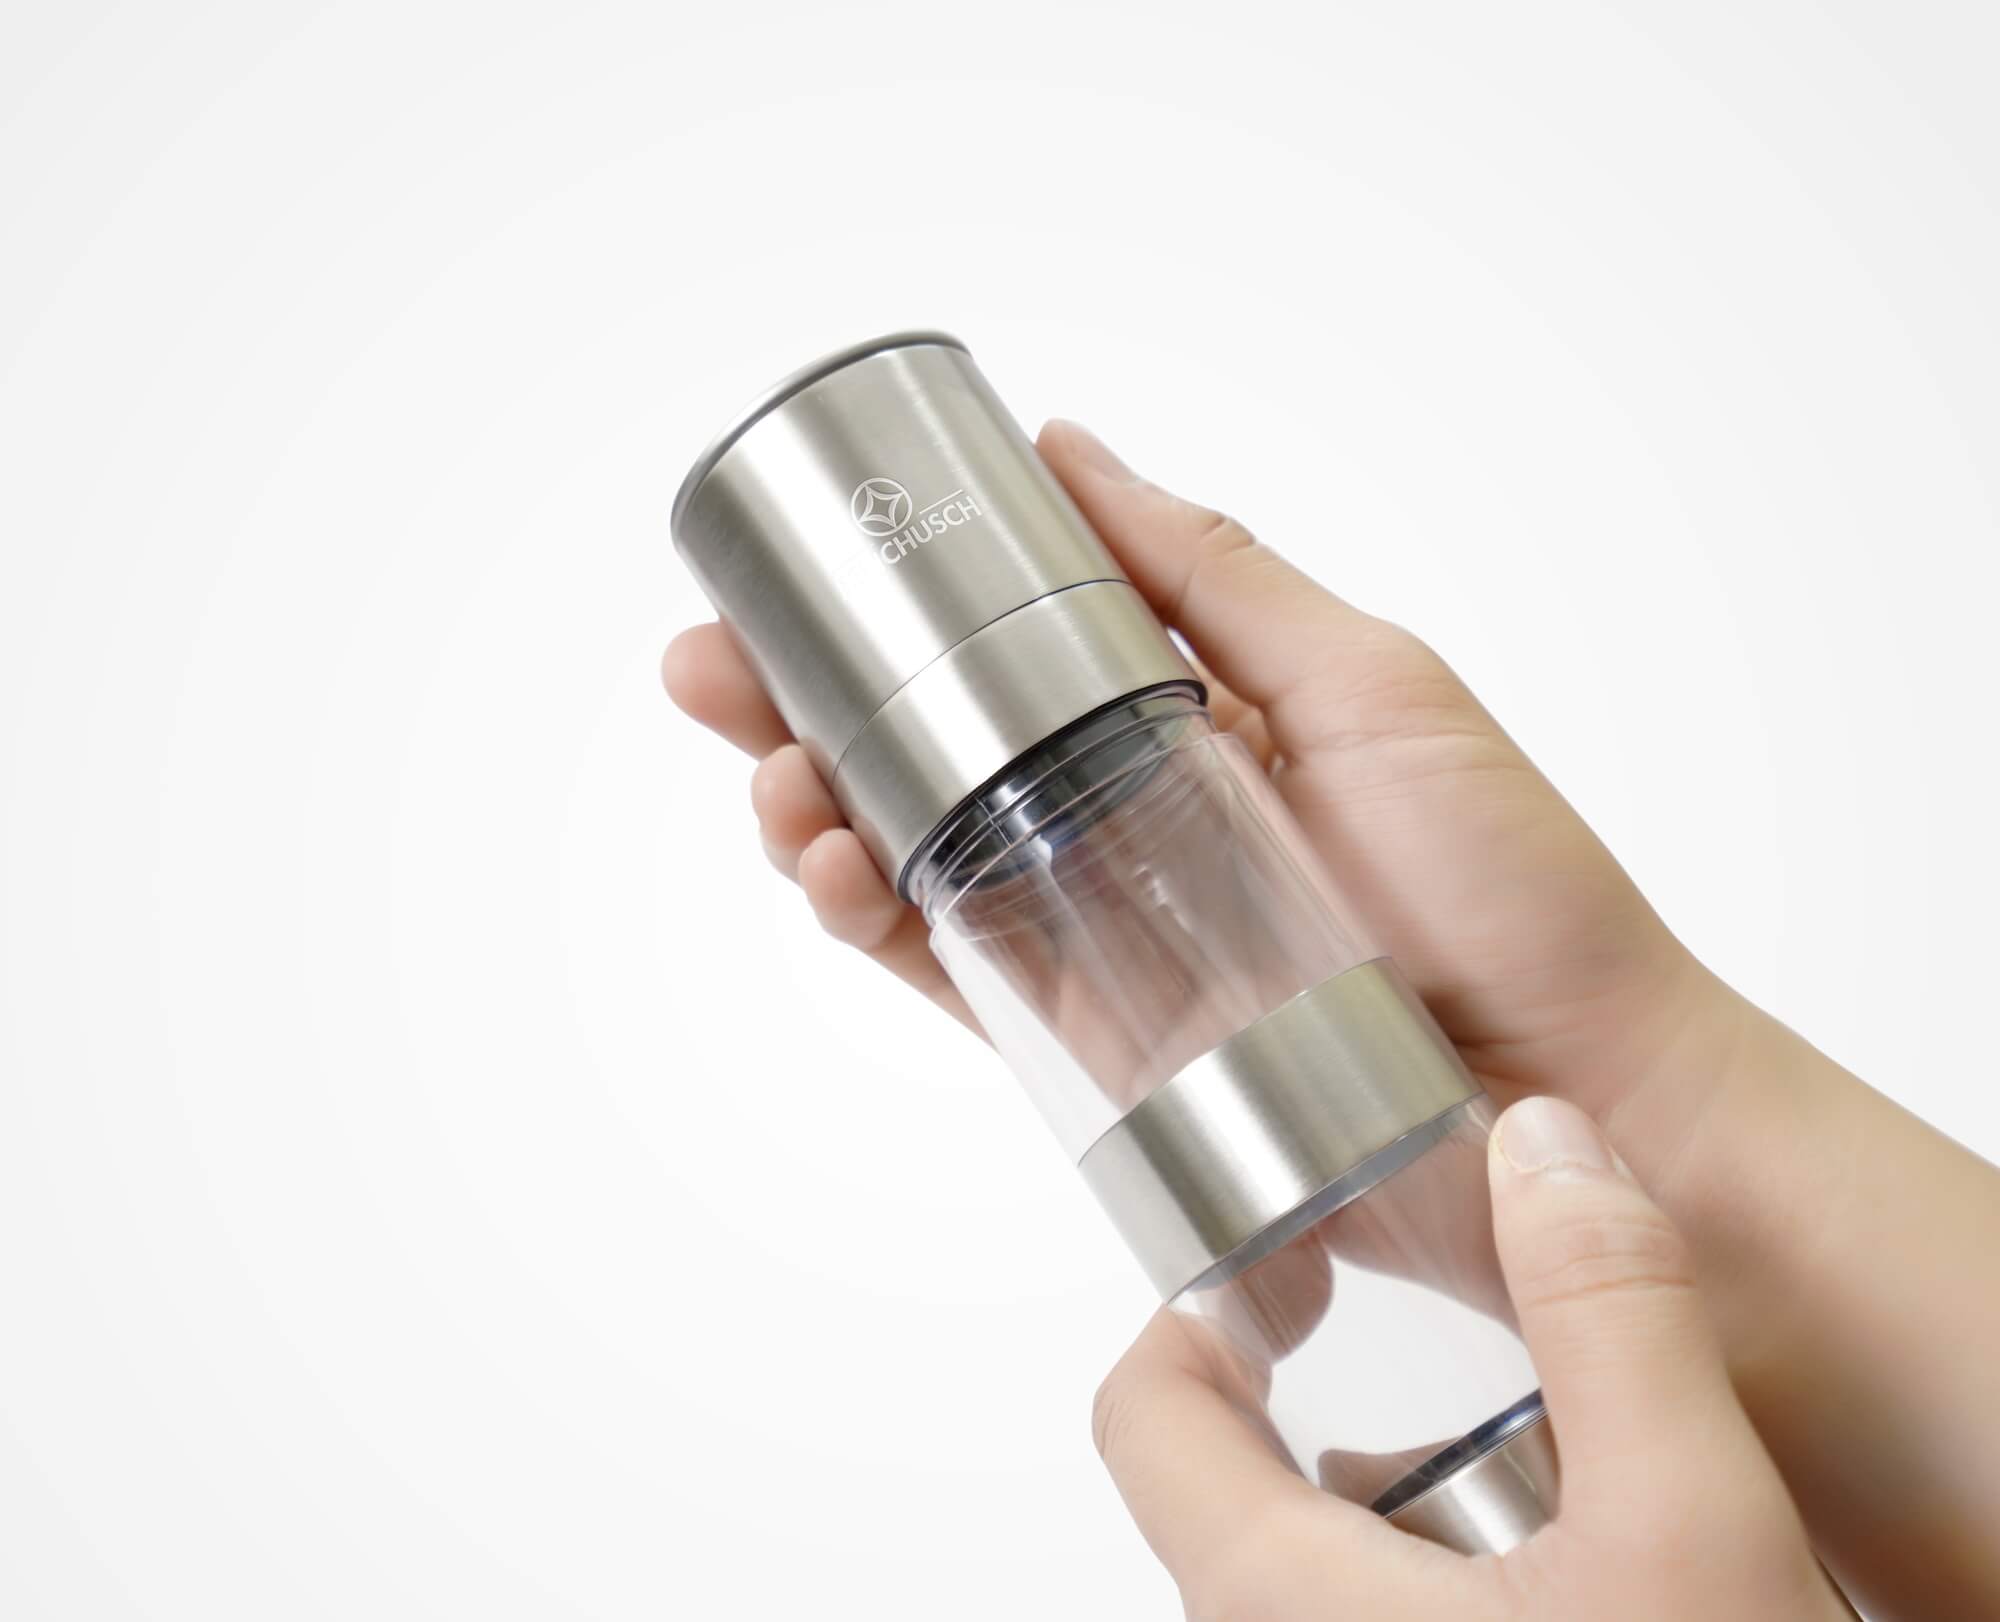 Opening the cover of Benchusch Modern 2 in 1 Salt and Pepper Grinder